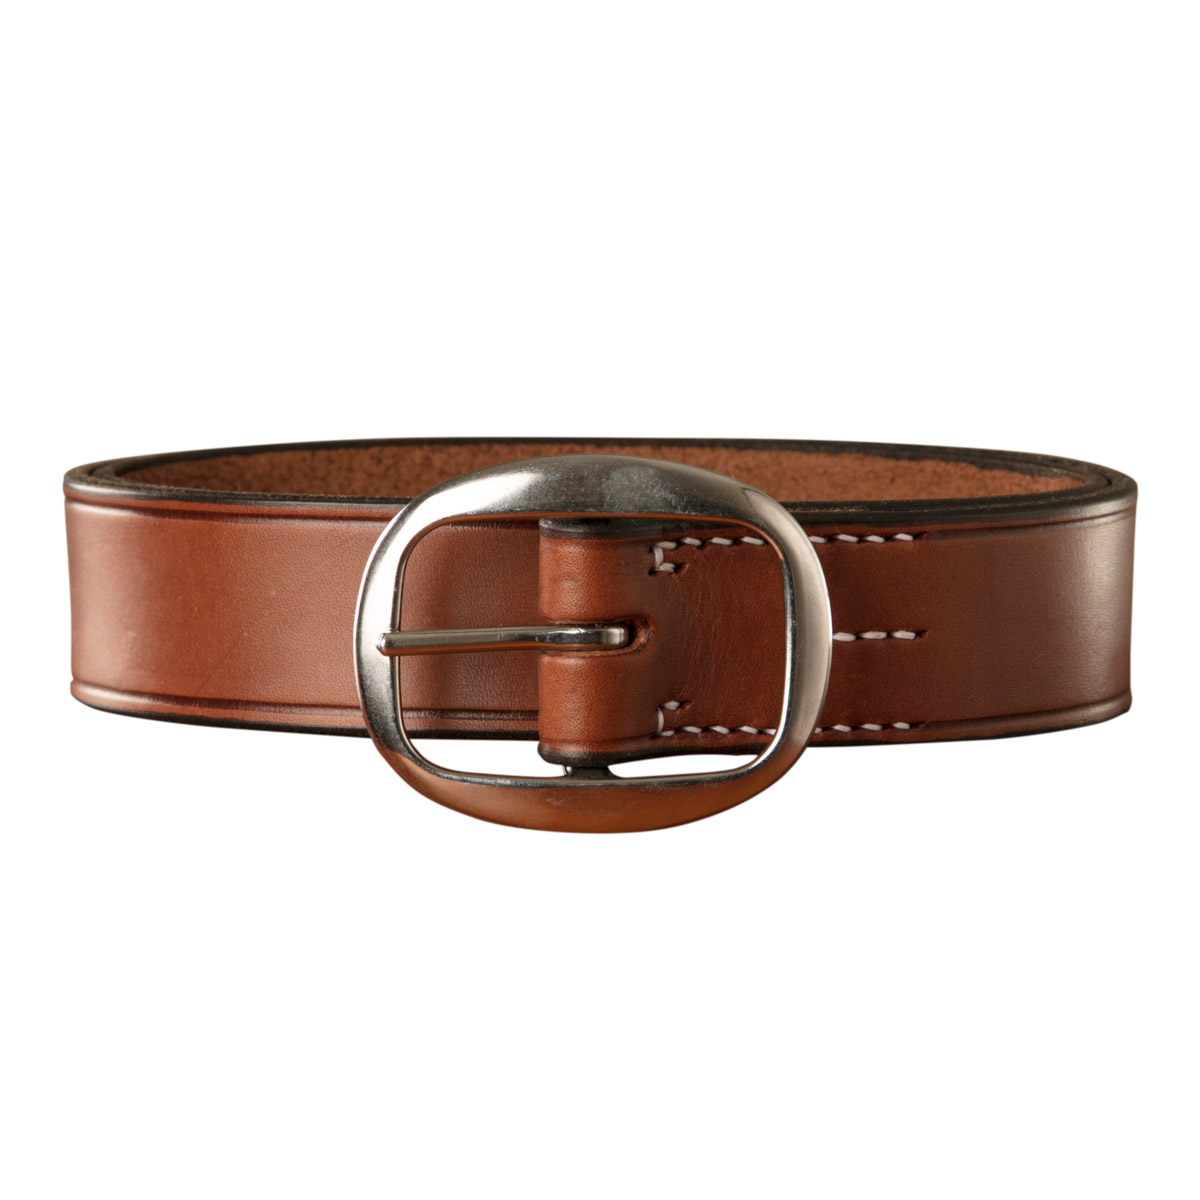 Stockmans Belt, Solid Leather, with Stainless Steel Swage Buckle - Plain 1